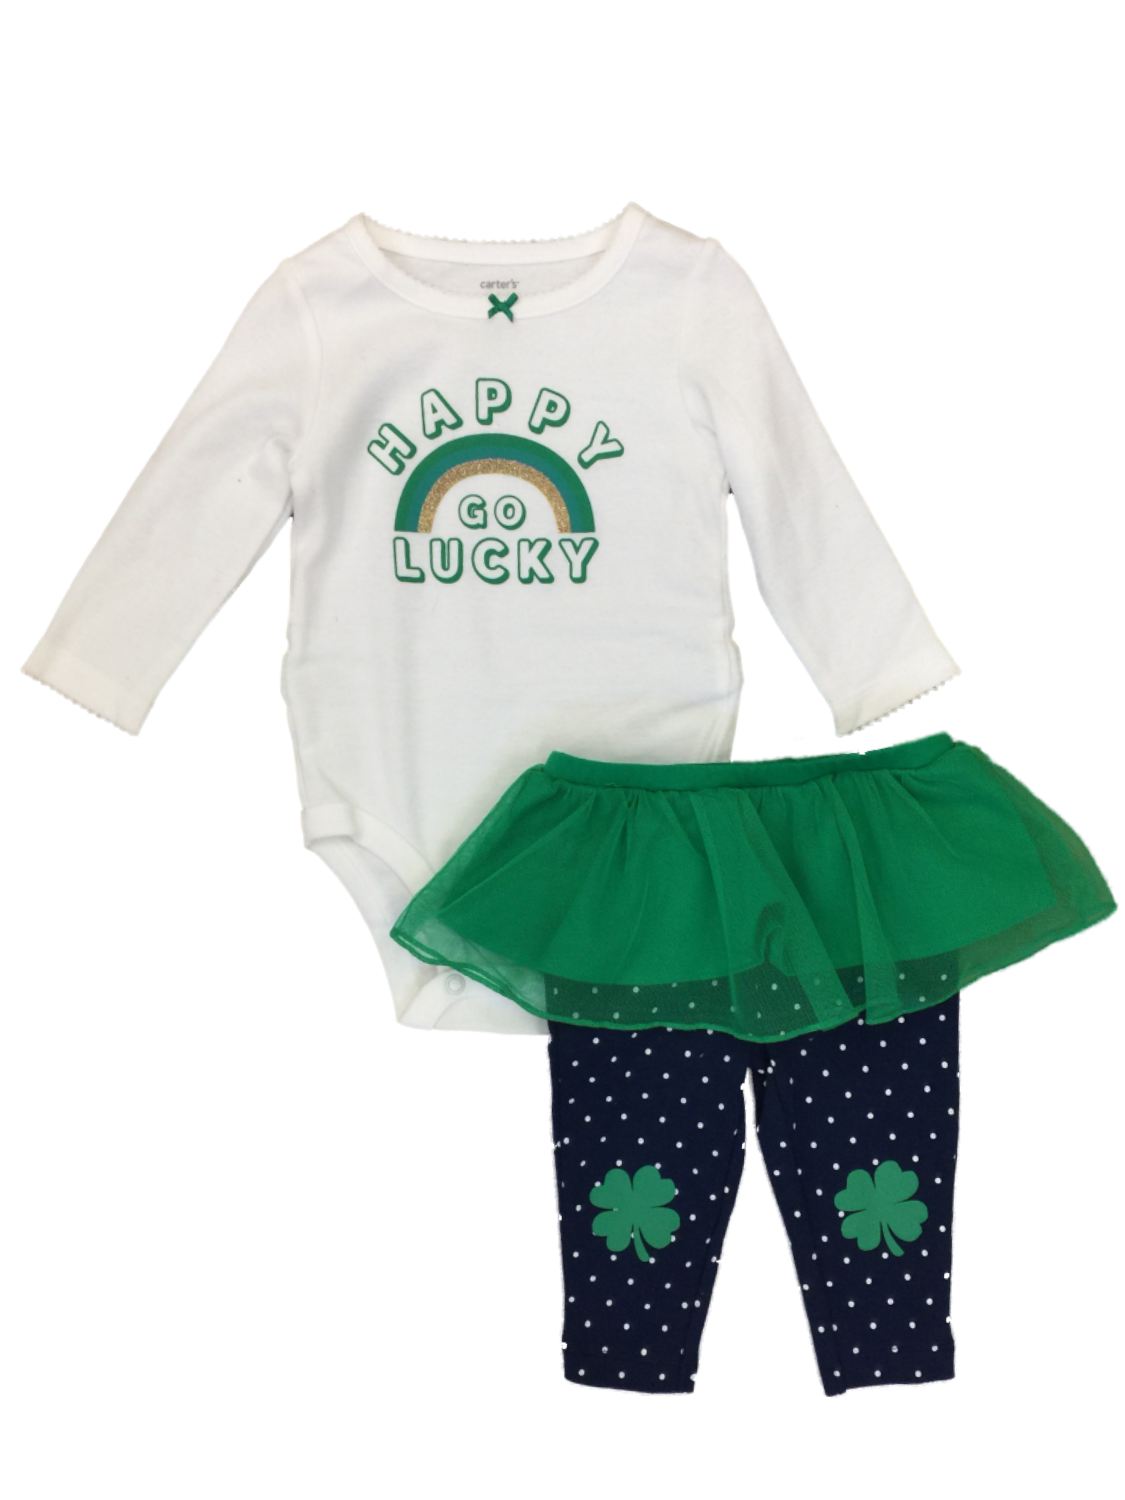 Carter's Carters Infant Girls St Patricks Day Outfit Happy Go Lucky Bodysuit & Pants NB